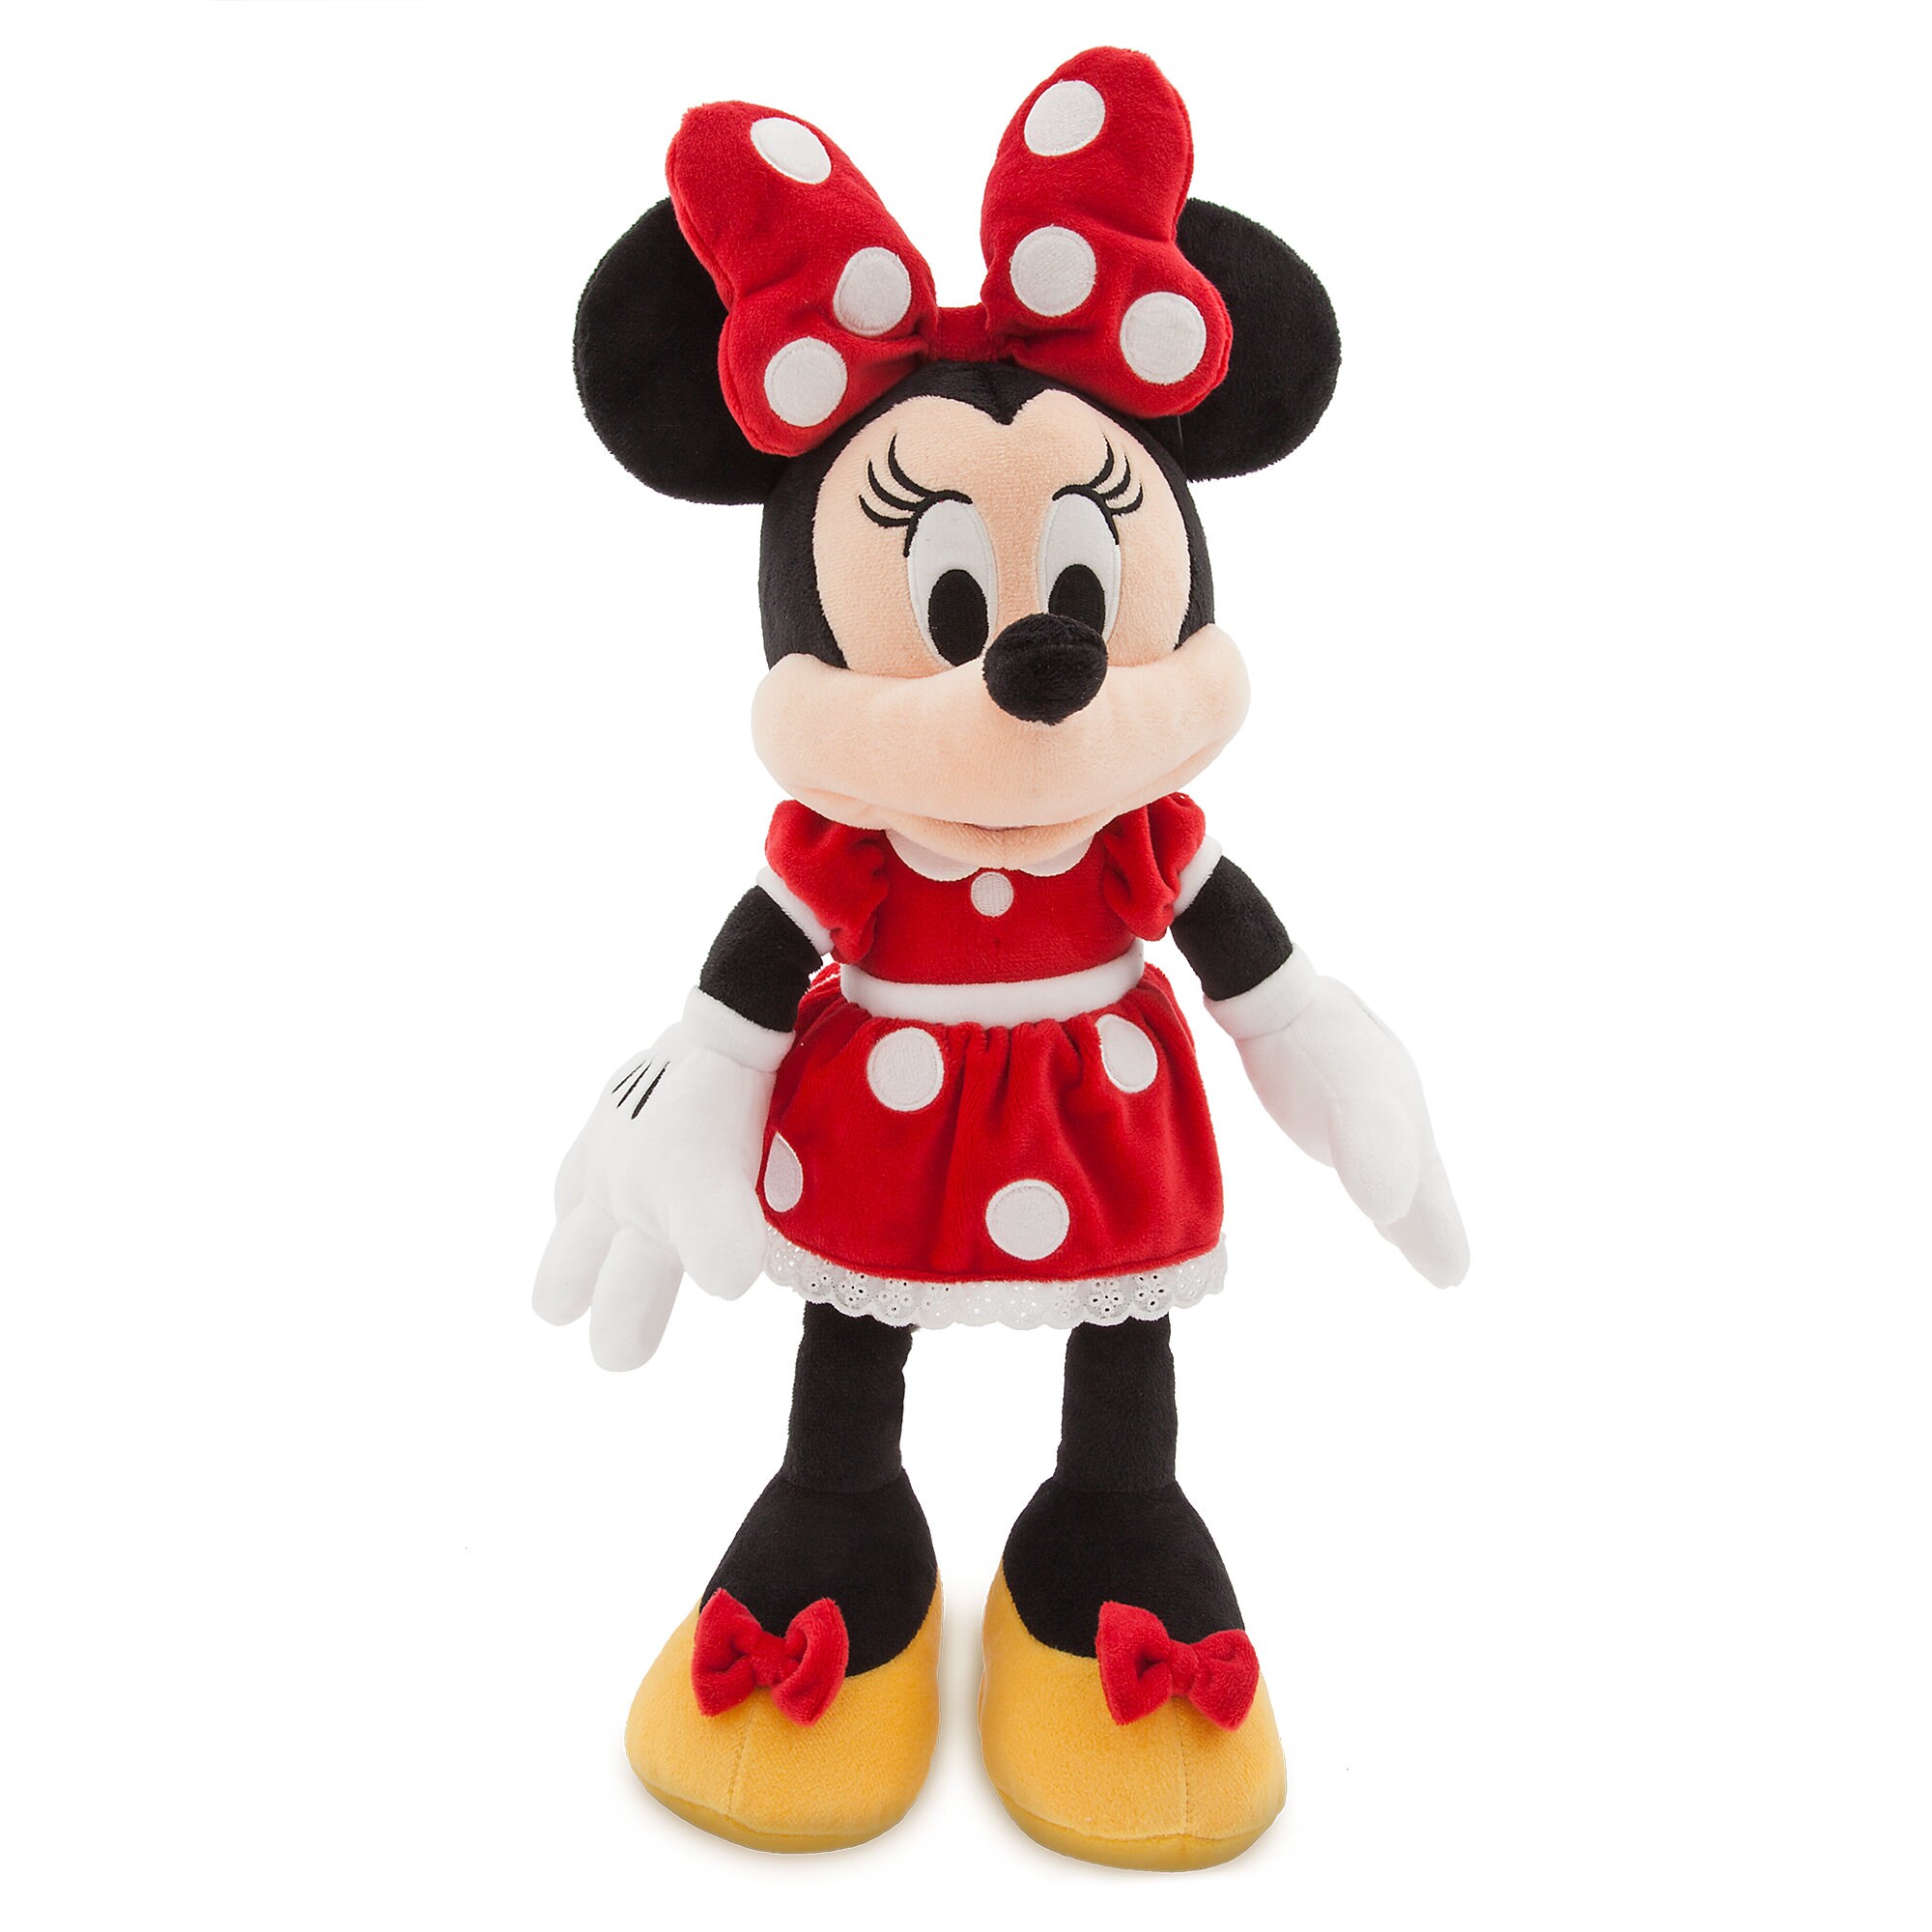 Minnie Mouse Plush - Red - Medium - 18'' - Personalizable